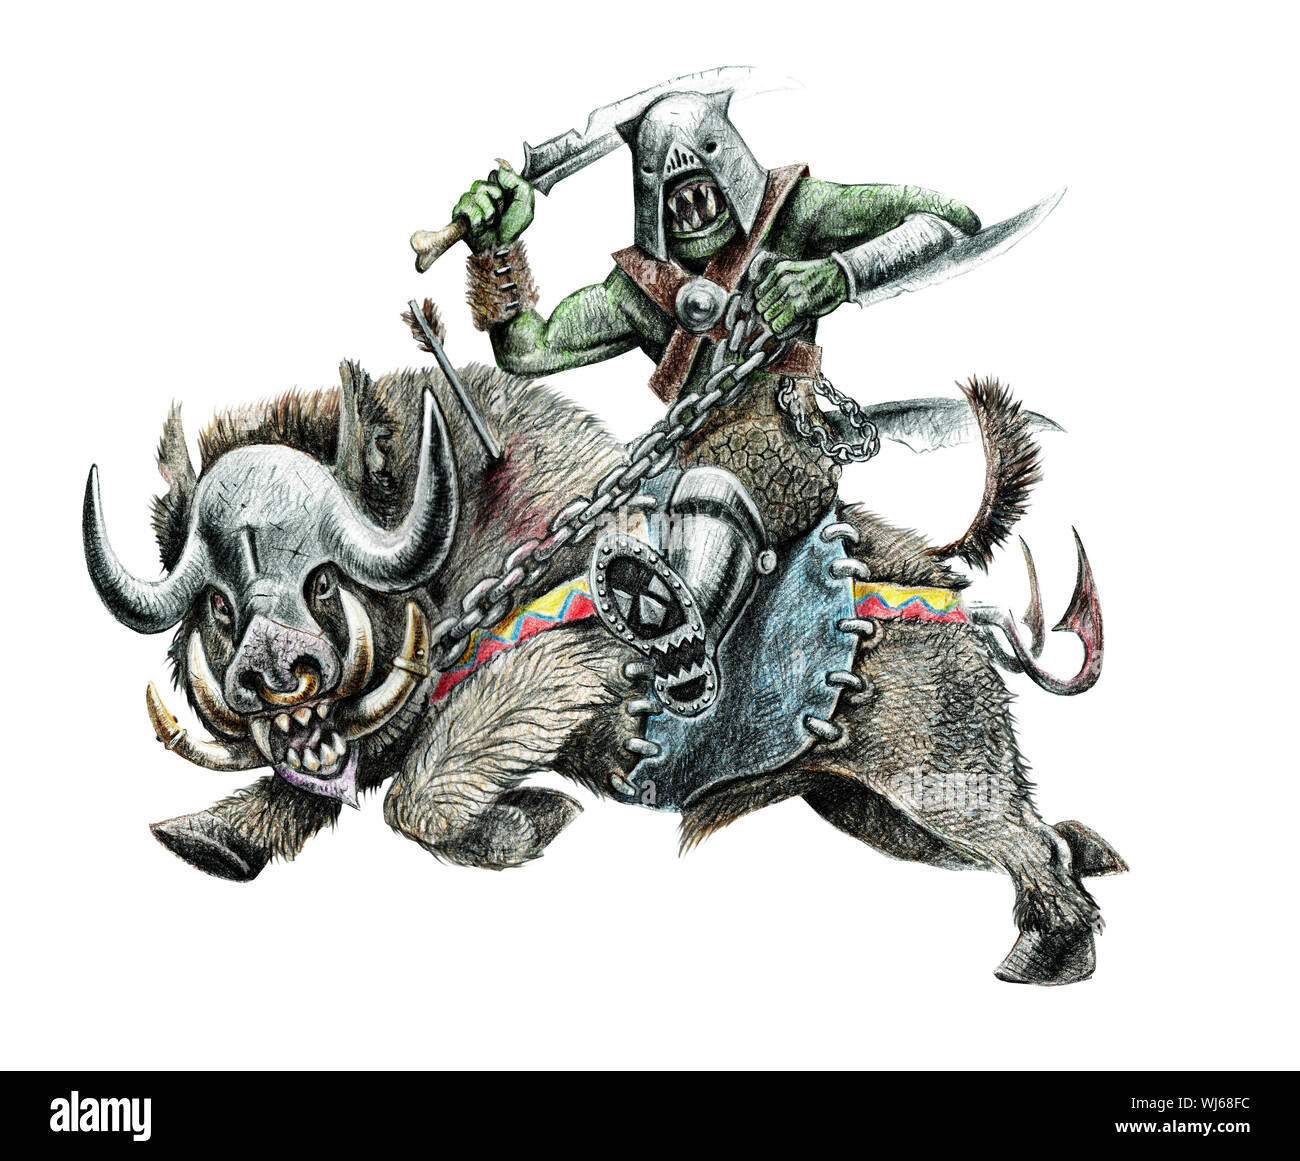 Orc on the boar. Fantasy pencil drawing. Monster creature illustration. Stock Photo